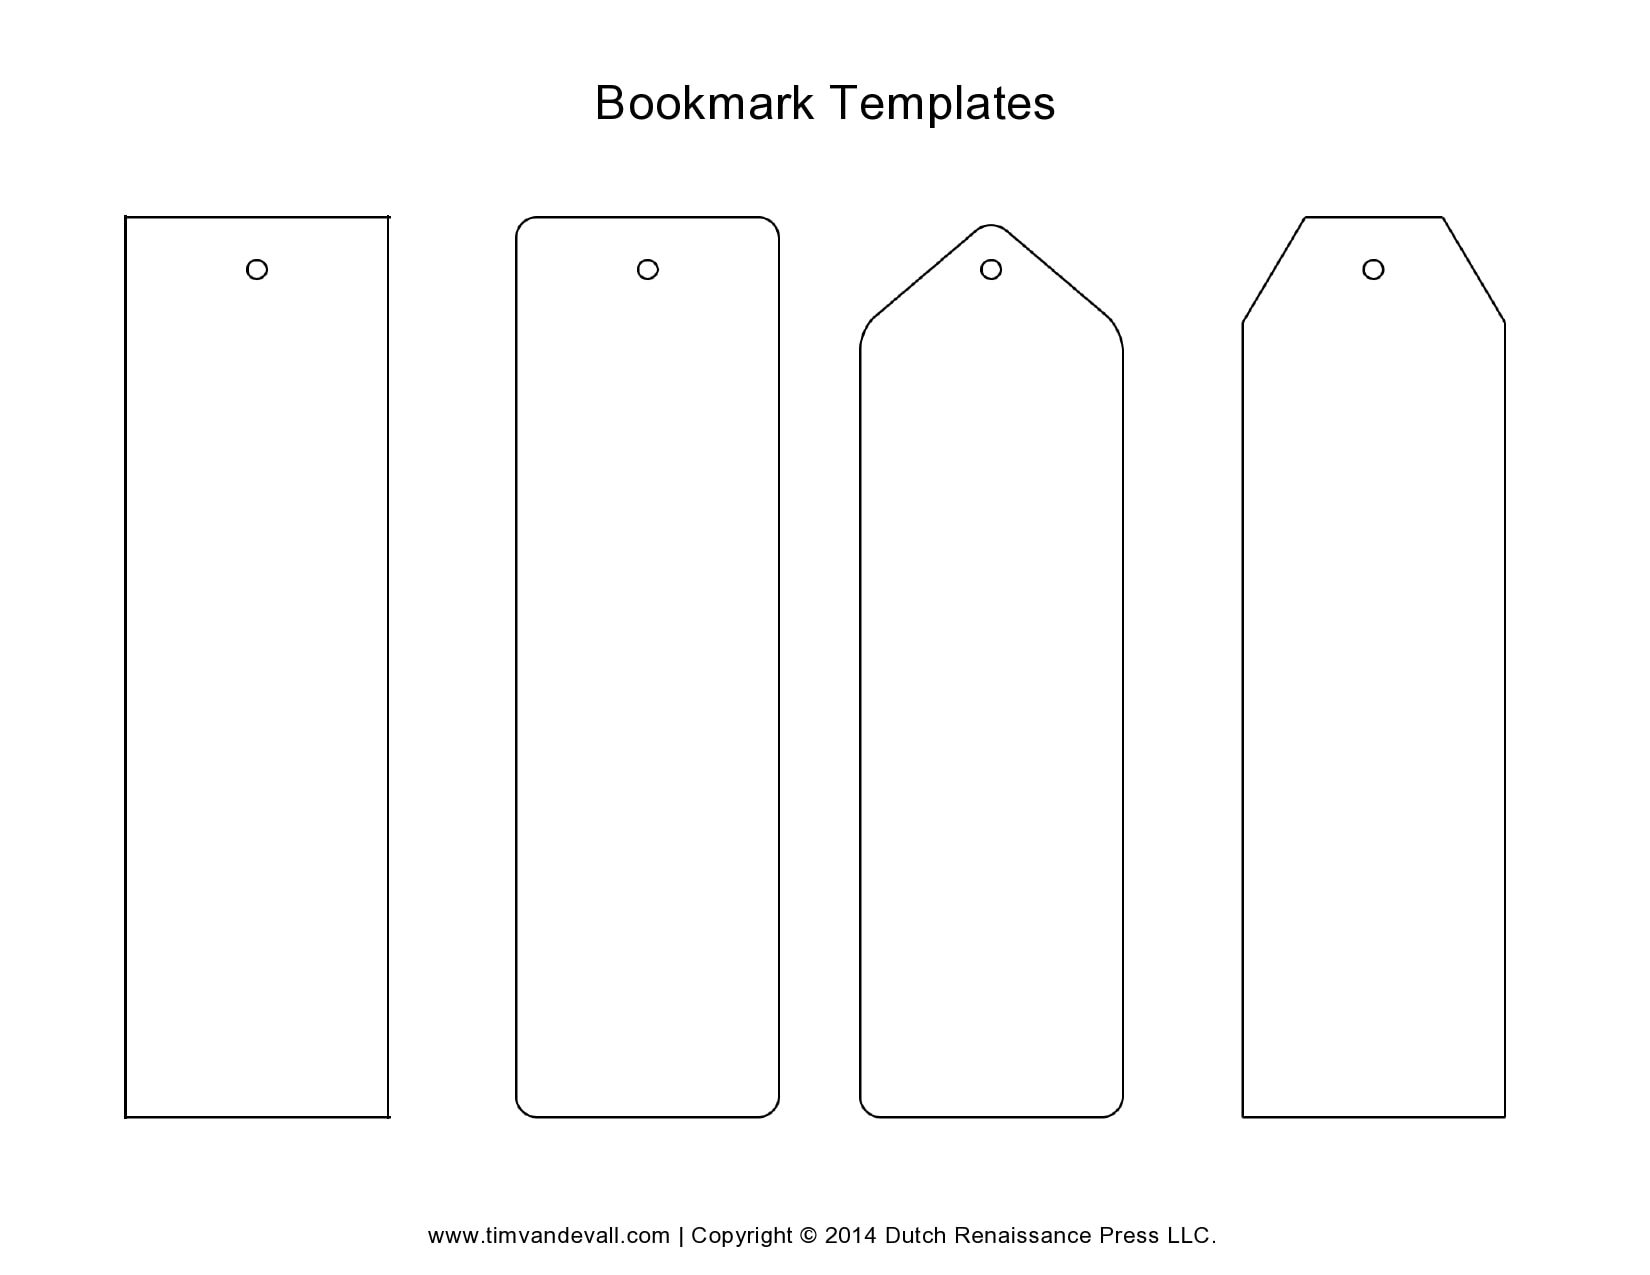 30 Free Bookmark Templates Word PDF TemplateArchive